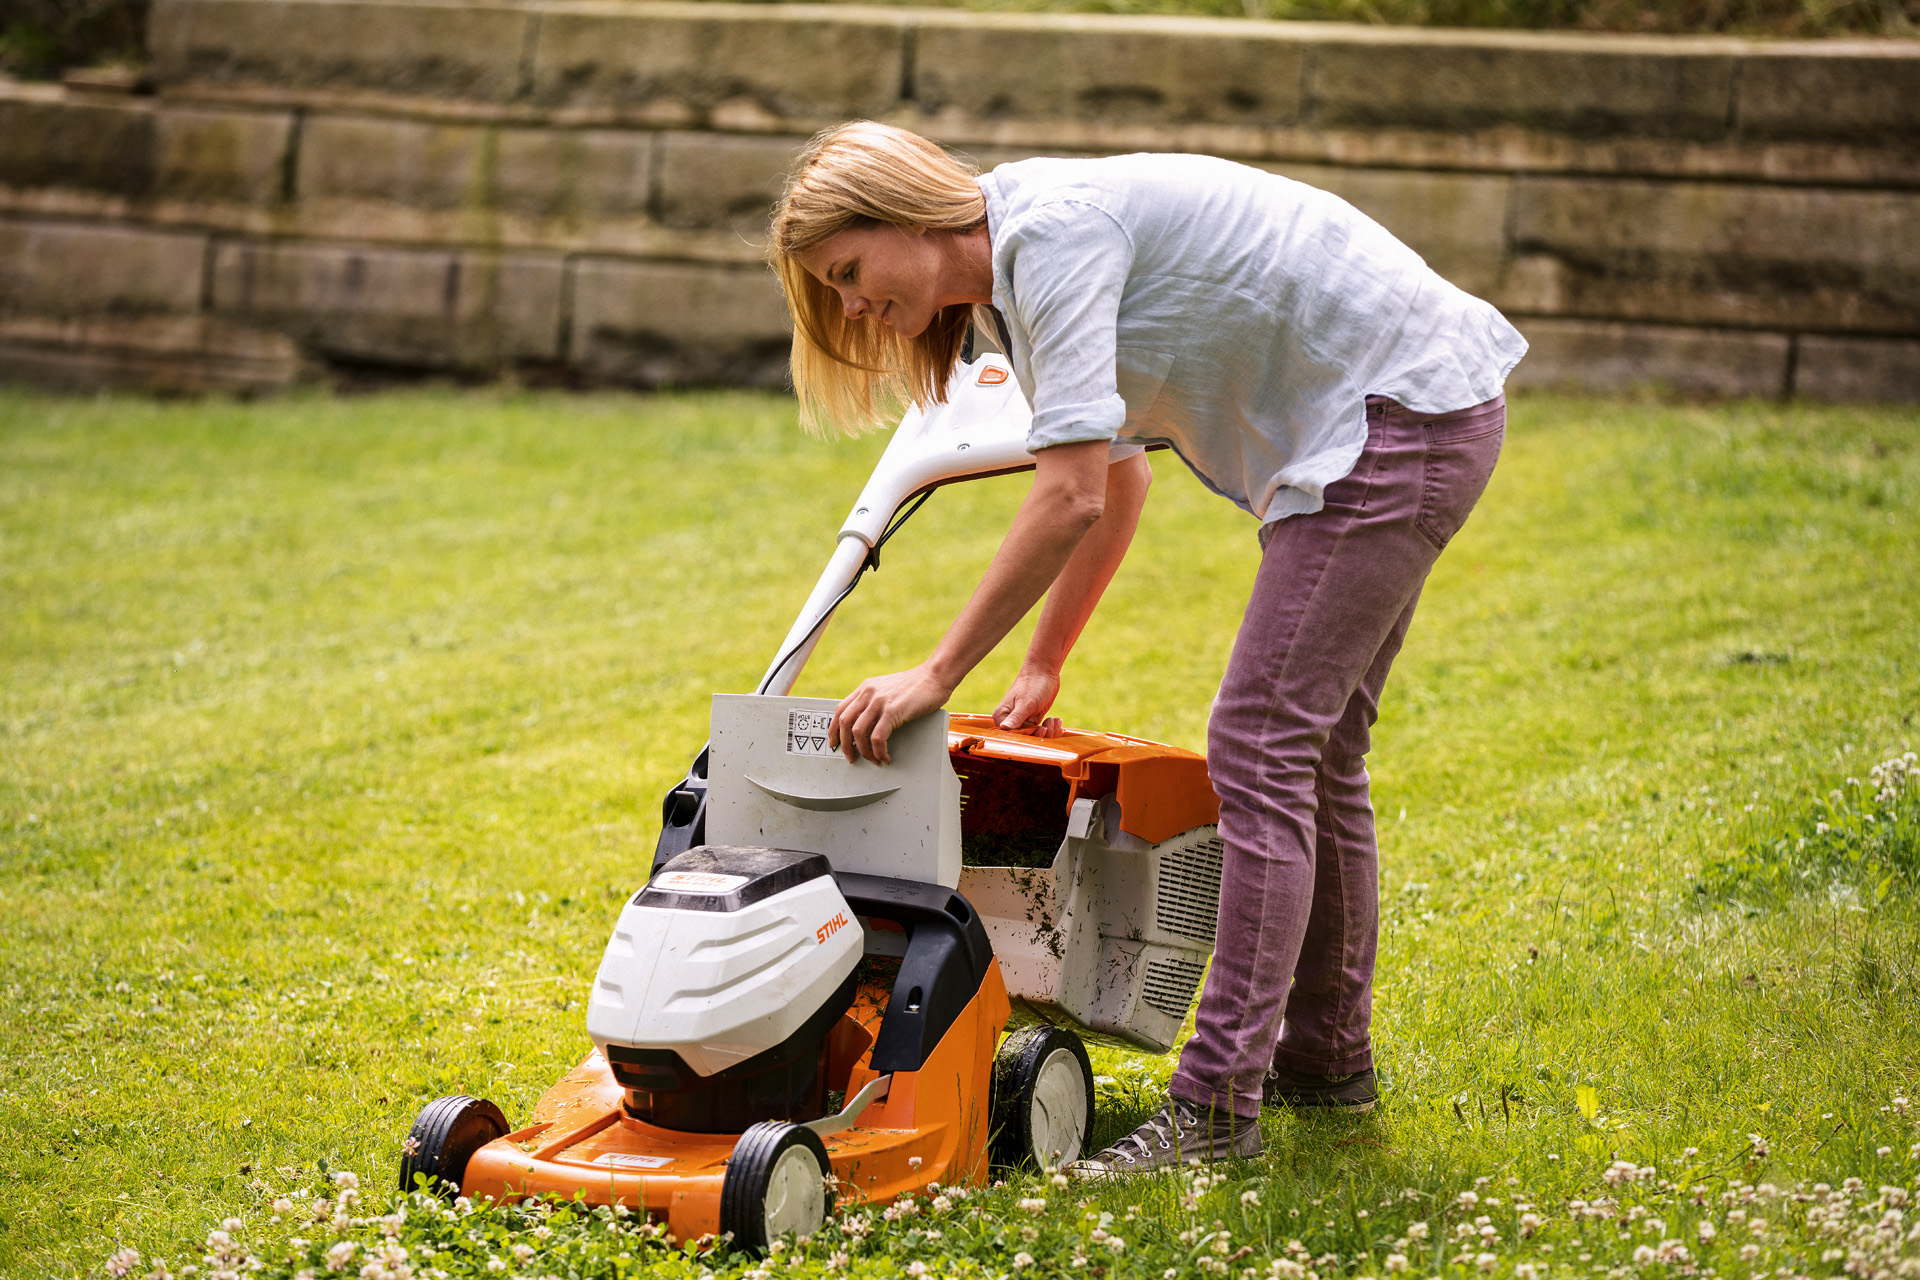 How to choose the best lawnmower for your lawn